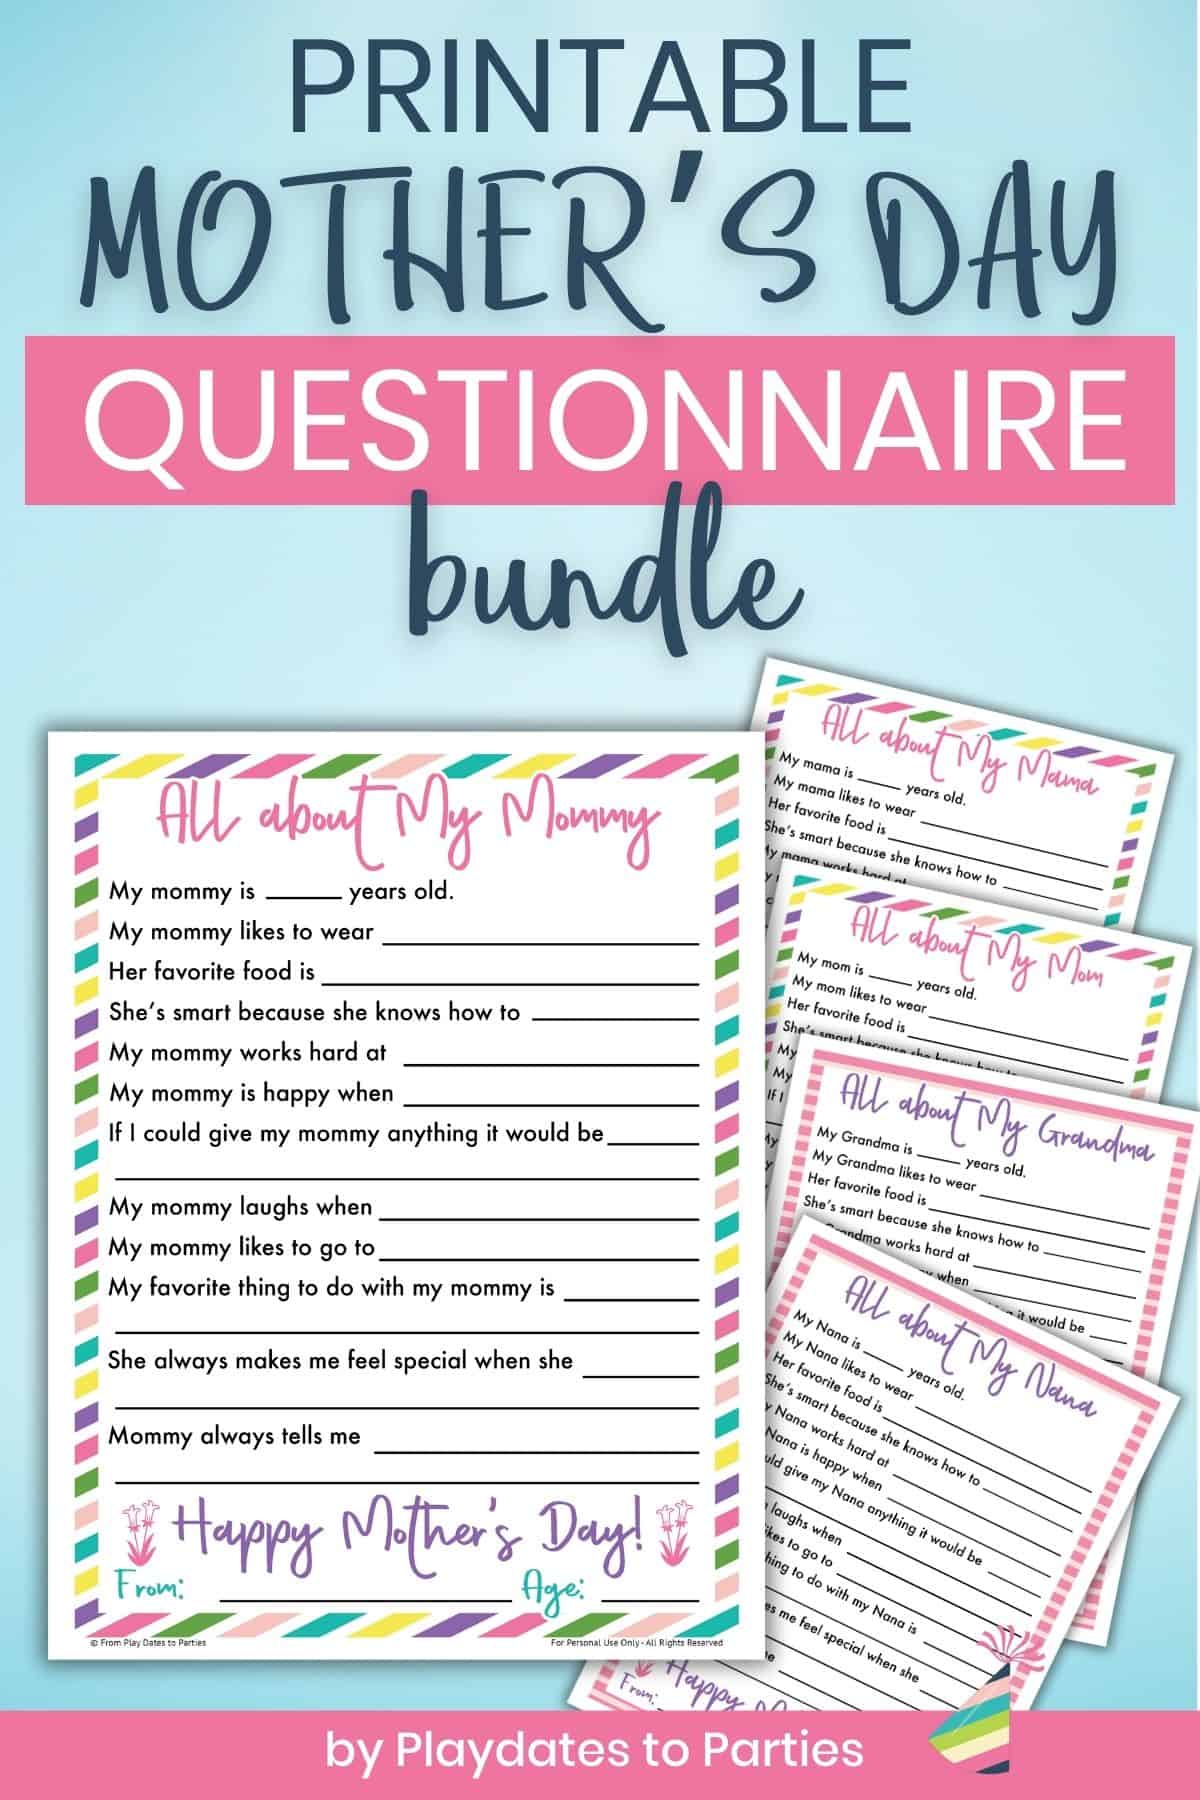 All About Mom Mother's Day Interview Bundle